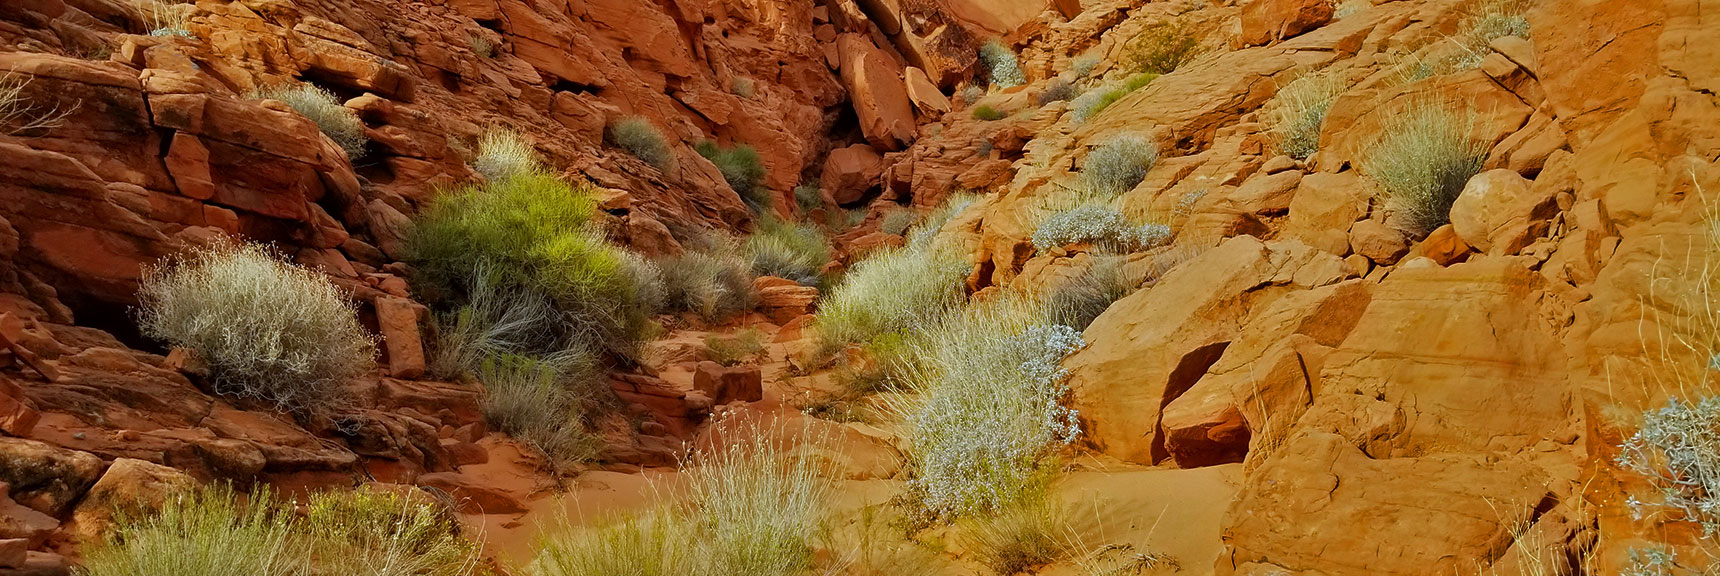 Entering Fire Canyon from Rainbow Vista Trail Overlook in Valley of Fire State Park, Nevada